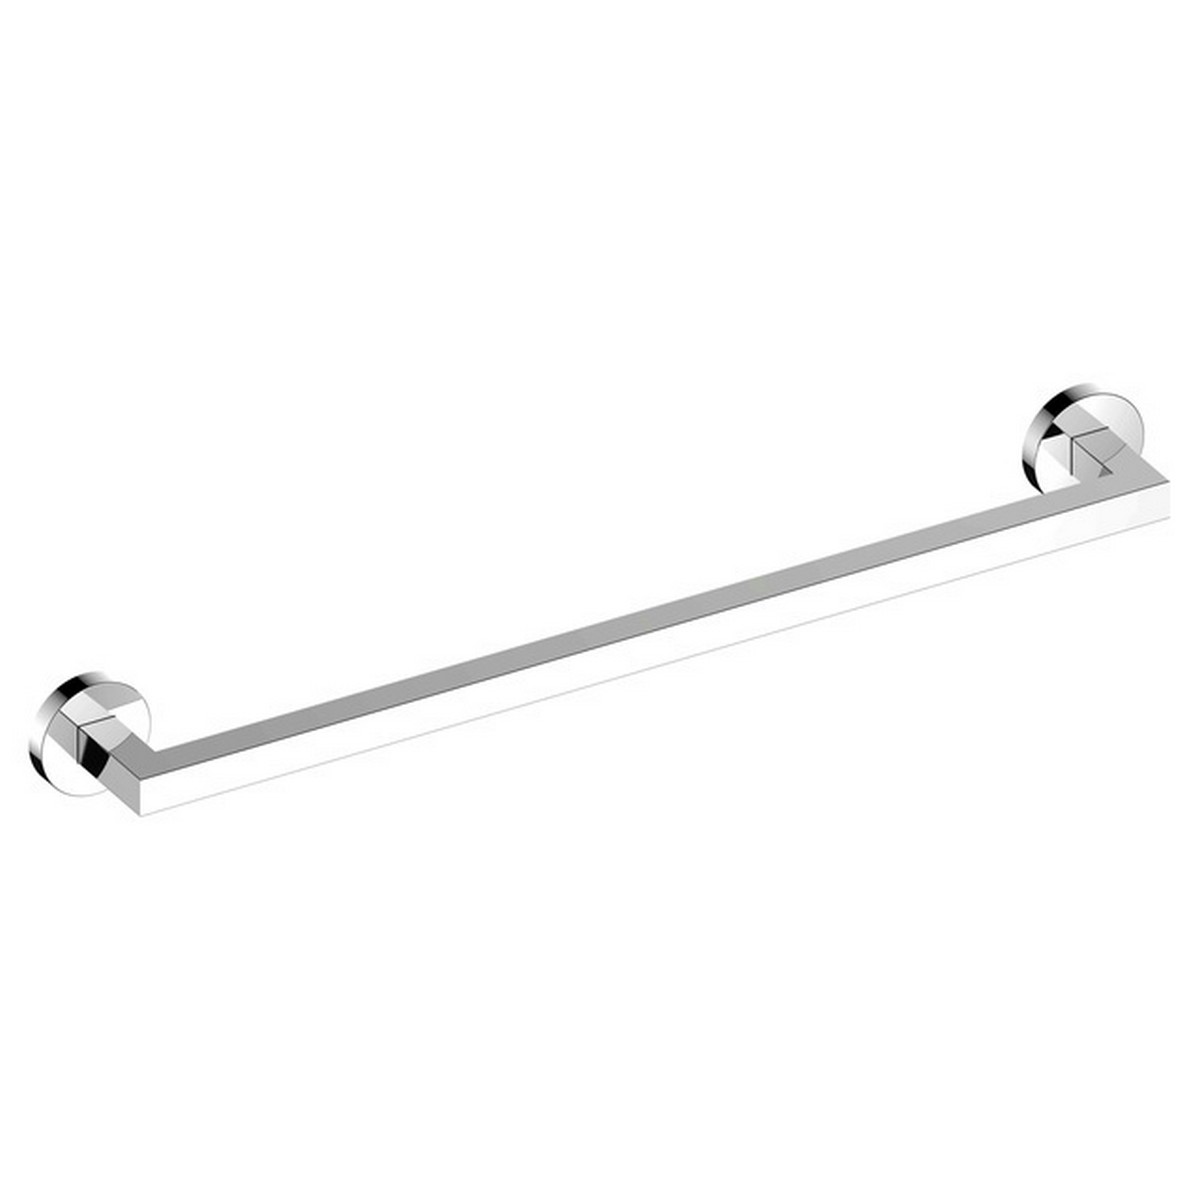 KEUCO 19001010800 EDITION 90 31 1/2 INCH WALL MOUNTED TOWEL RAIL IN POLISHED CHROME